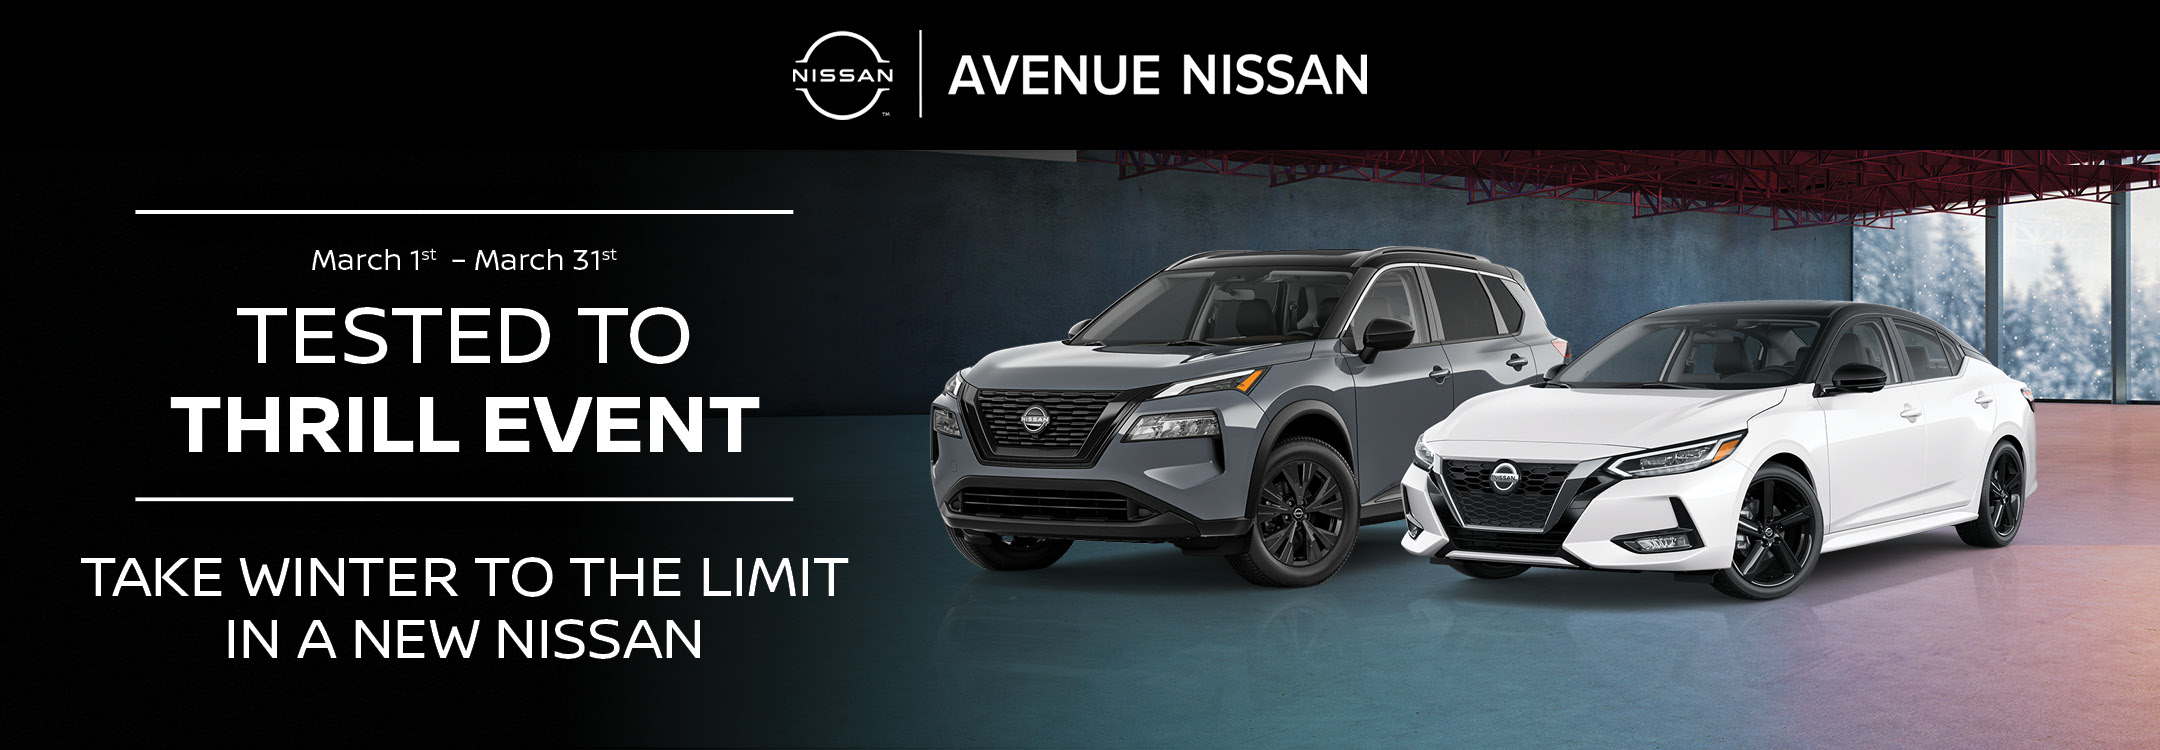 Tested To Thrill | Avenue Nissan | Toronto, ON